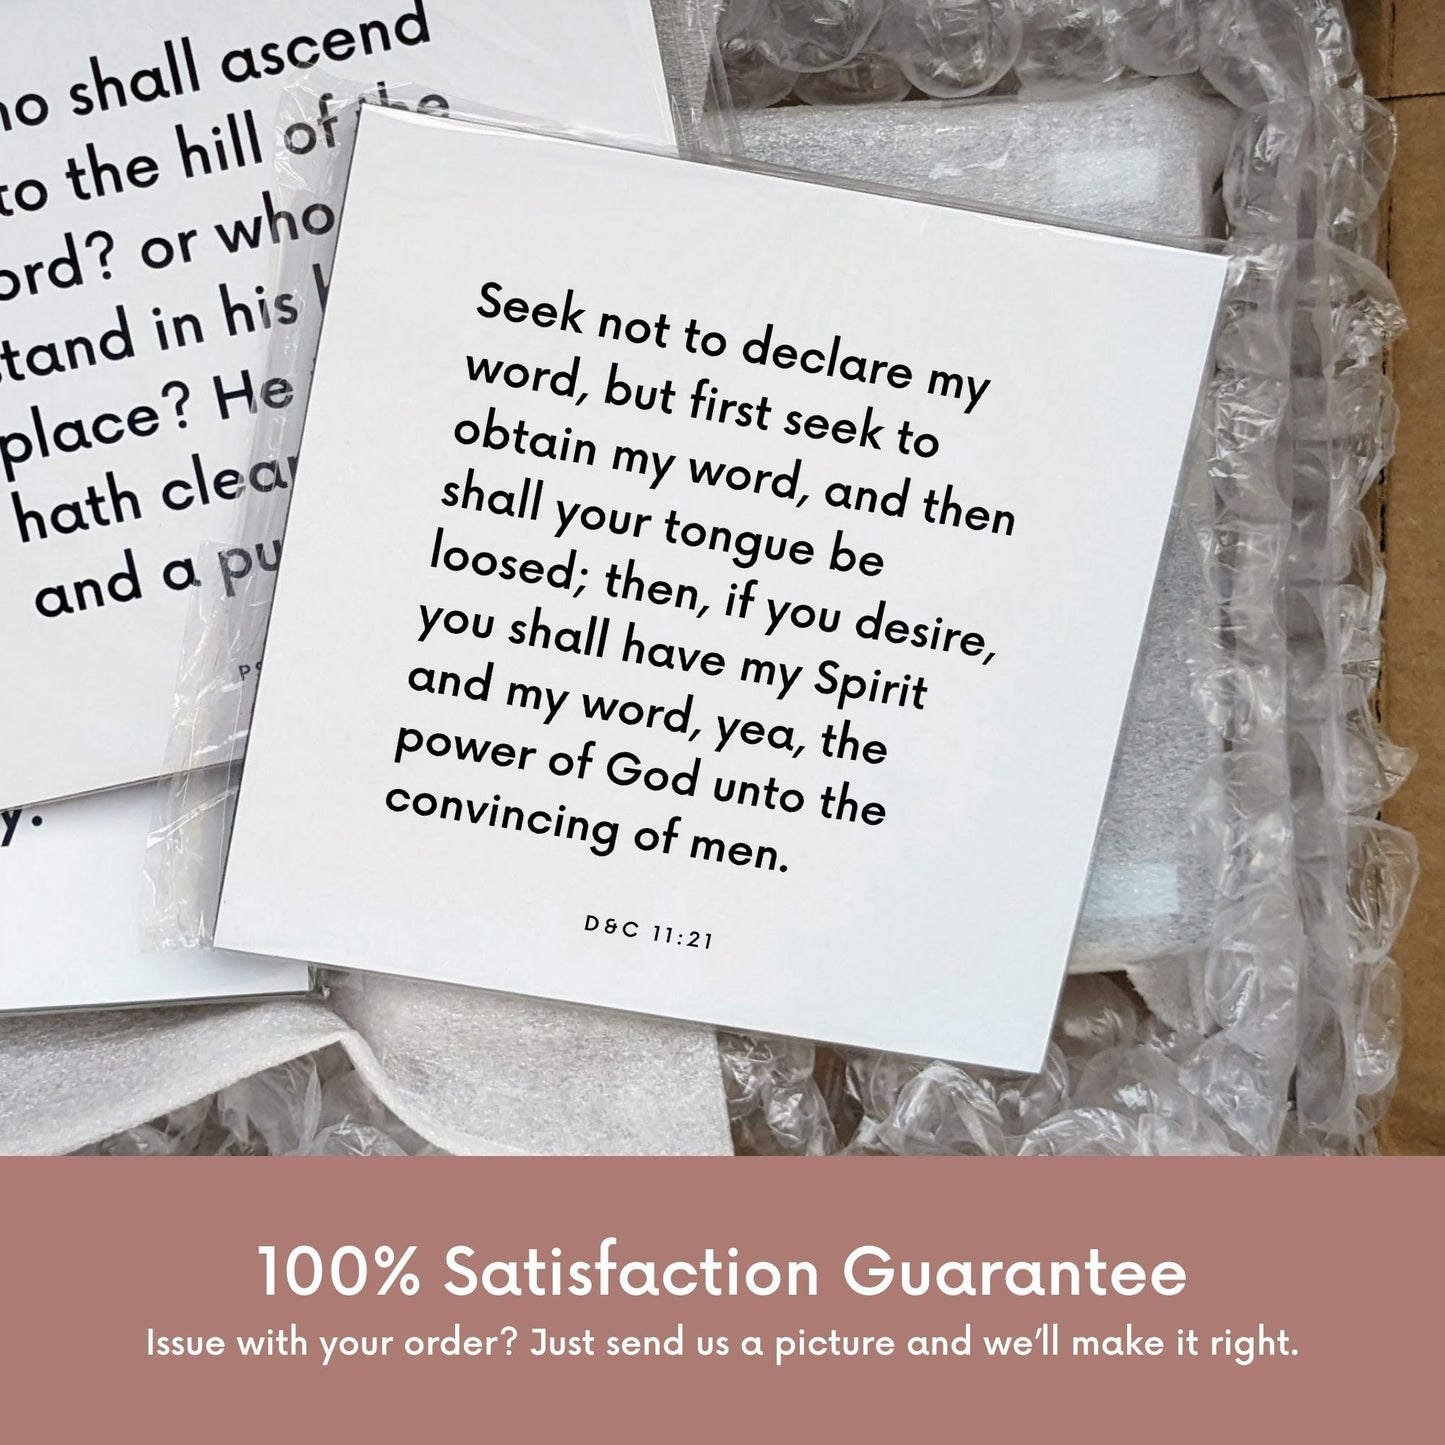 Shipping materials for scripture tile of D&C 11:21 - "Seek not to declare my word, but first seek to obtain my word"